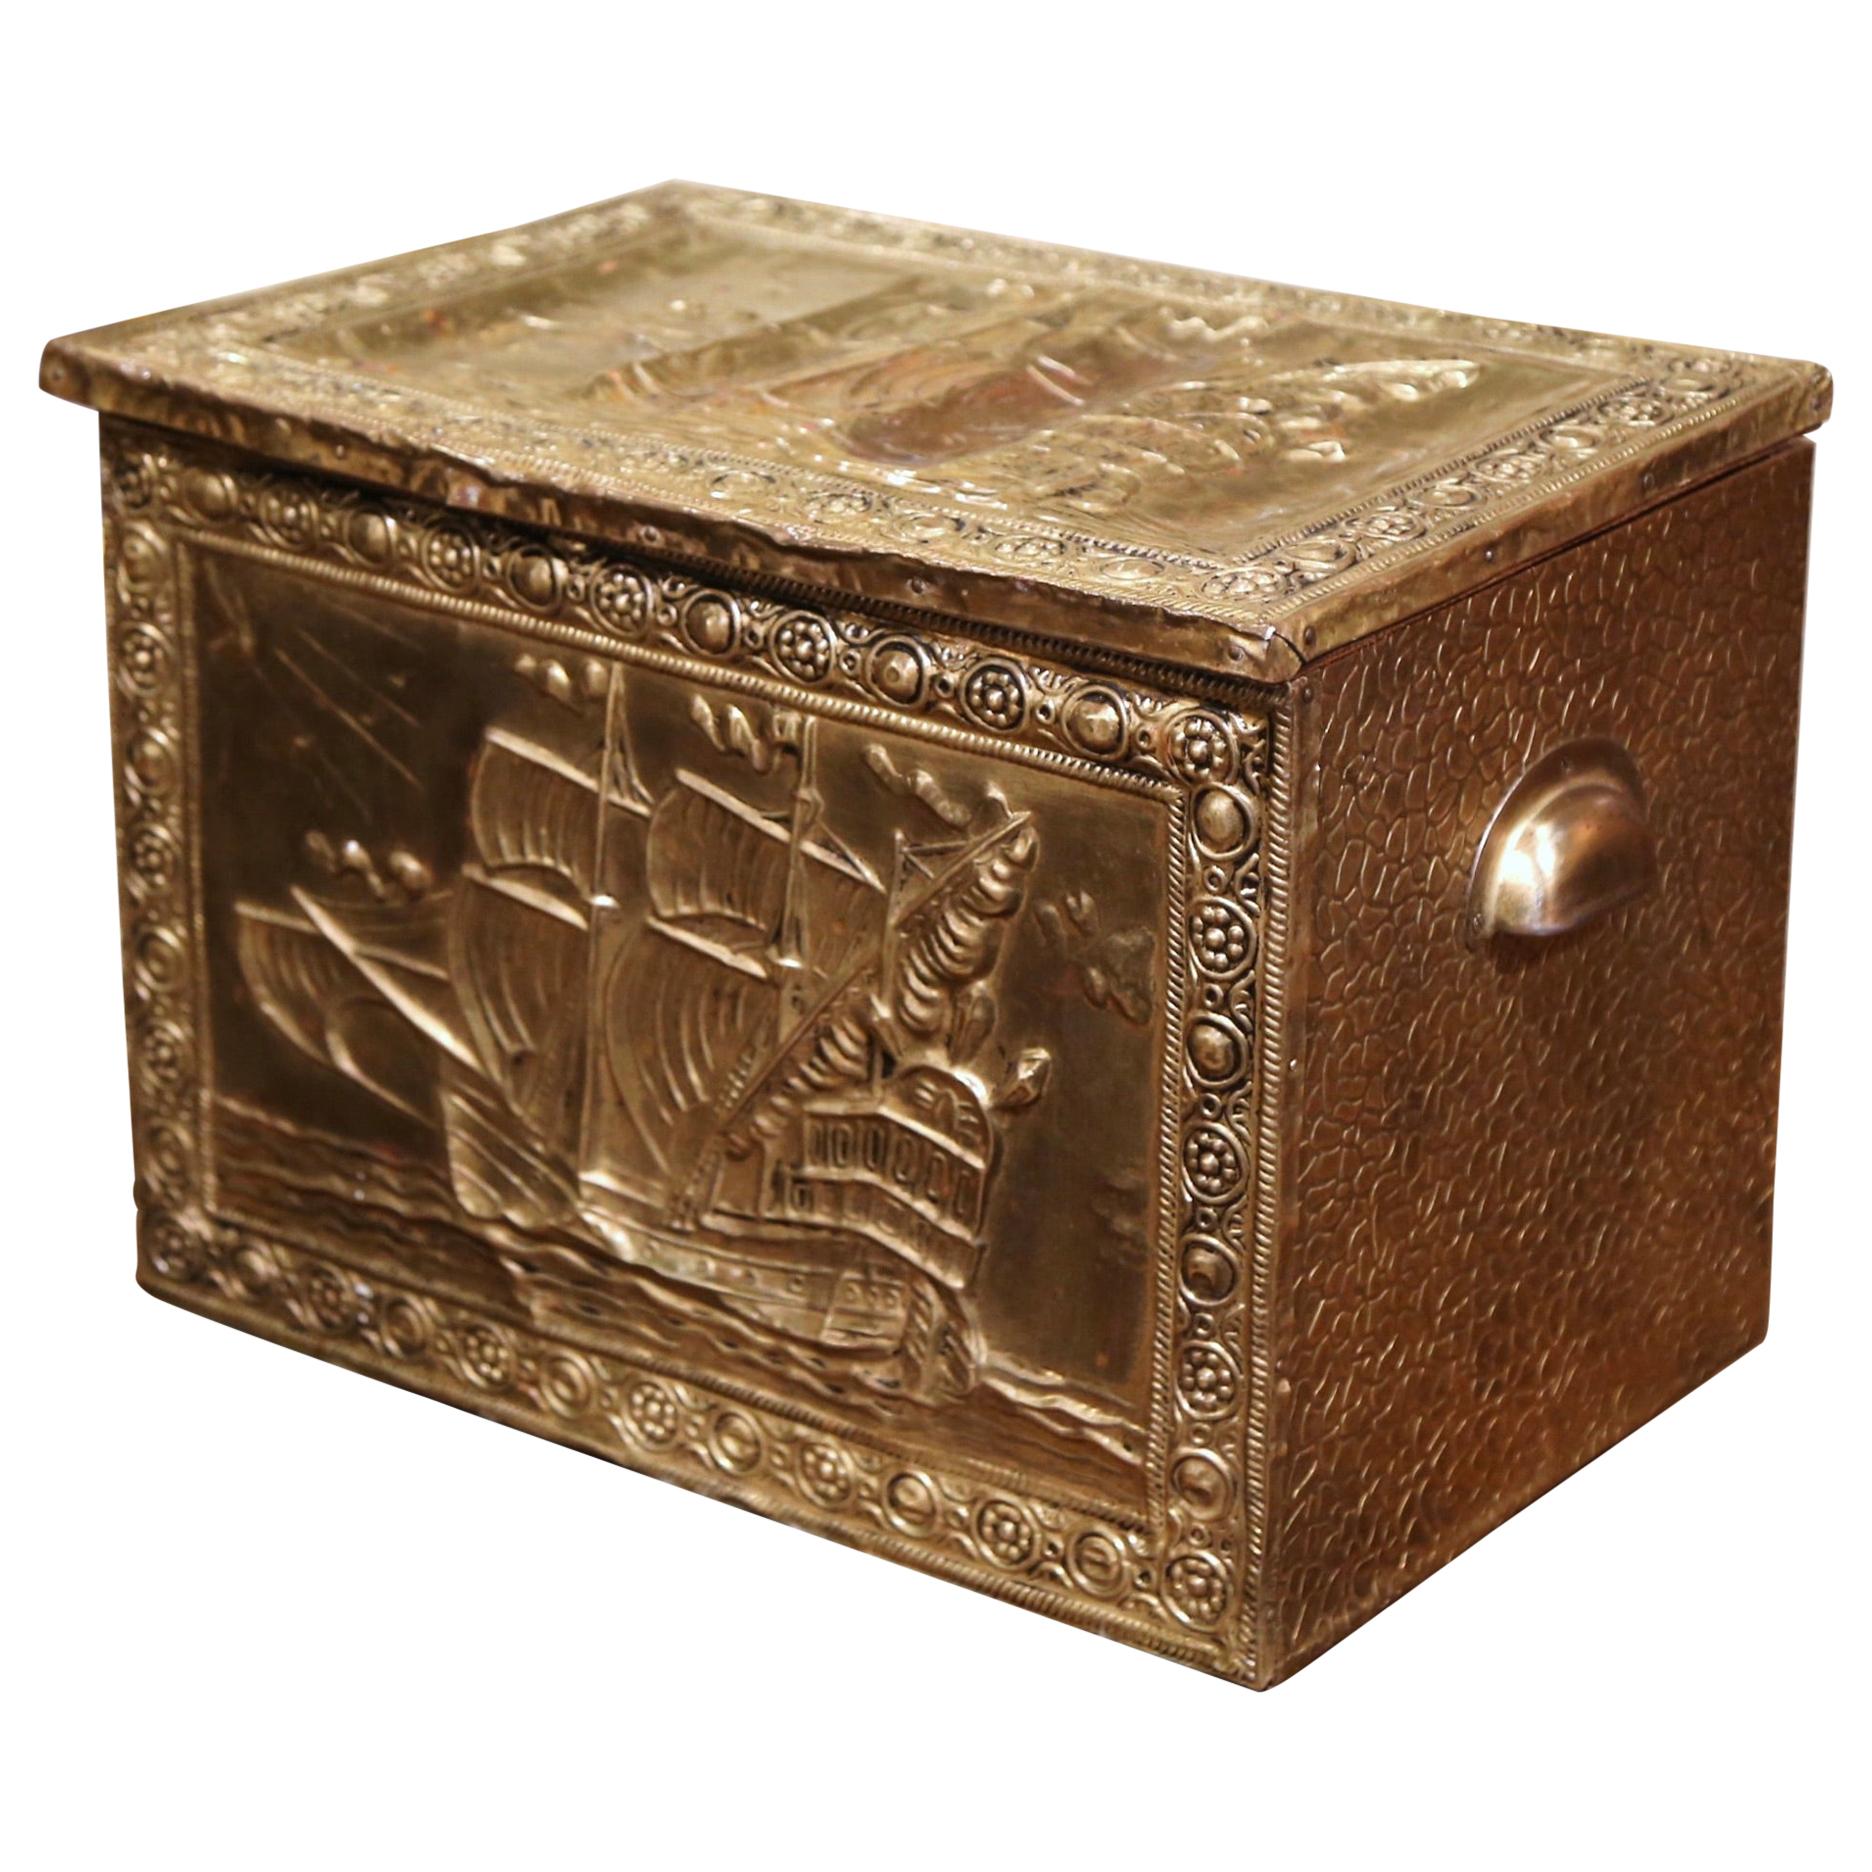 19th Century French Repousse Brass and Wood Box with Sailboat Decor